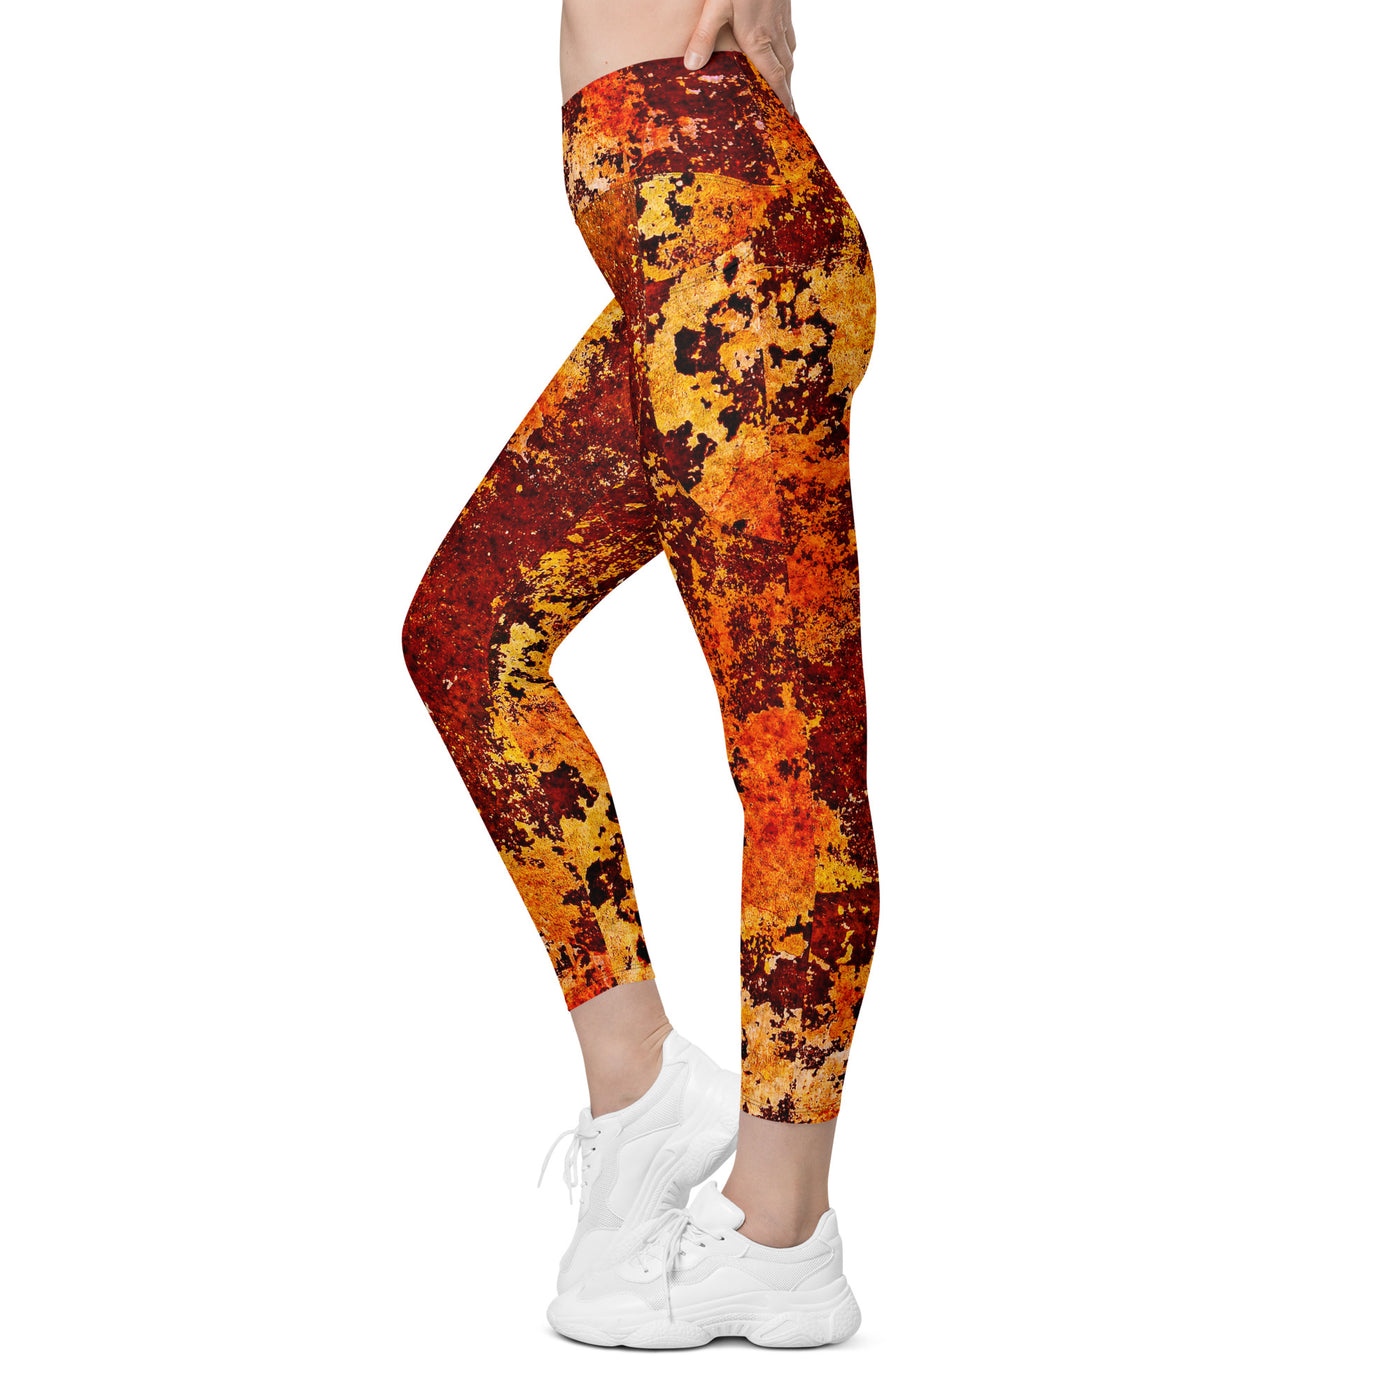 Rust - Crossover leggings with pockets